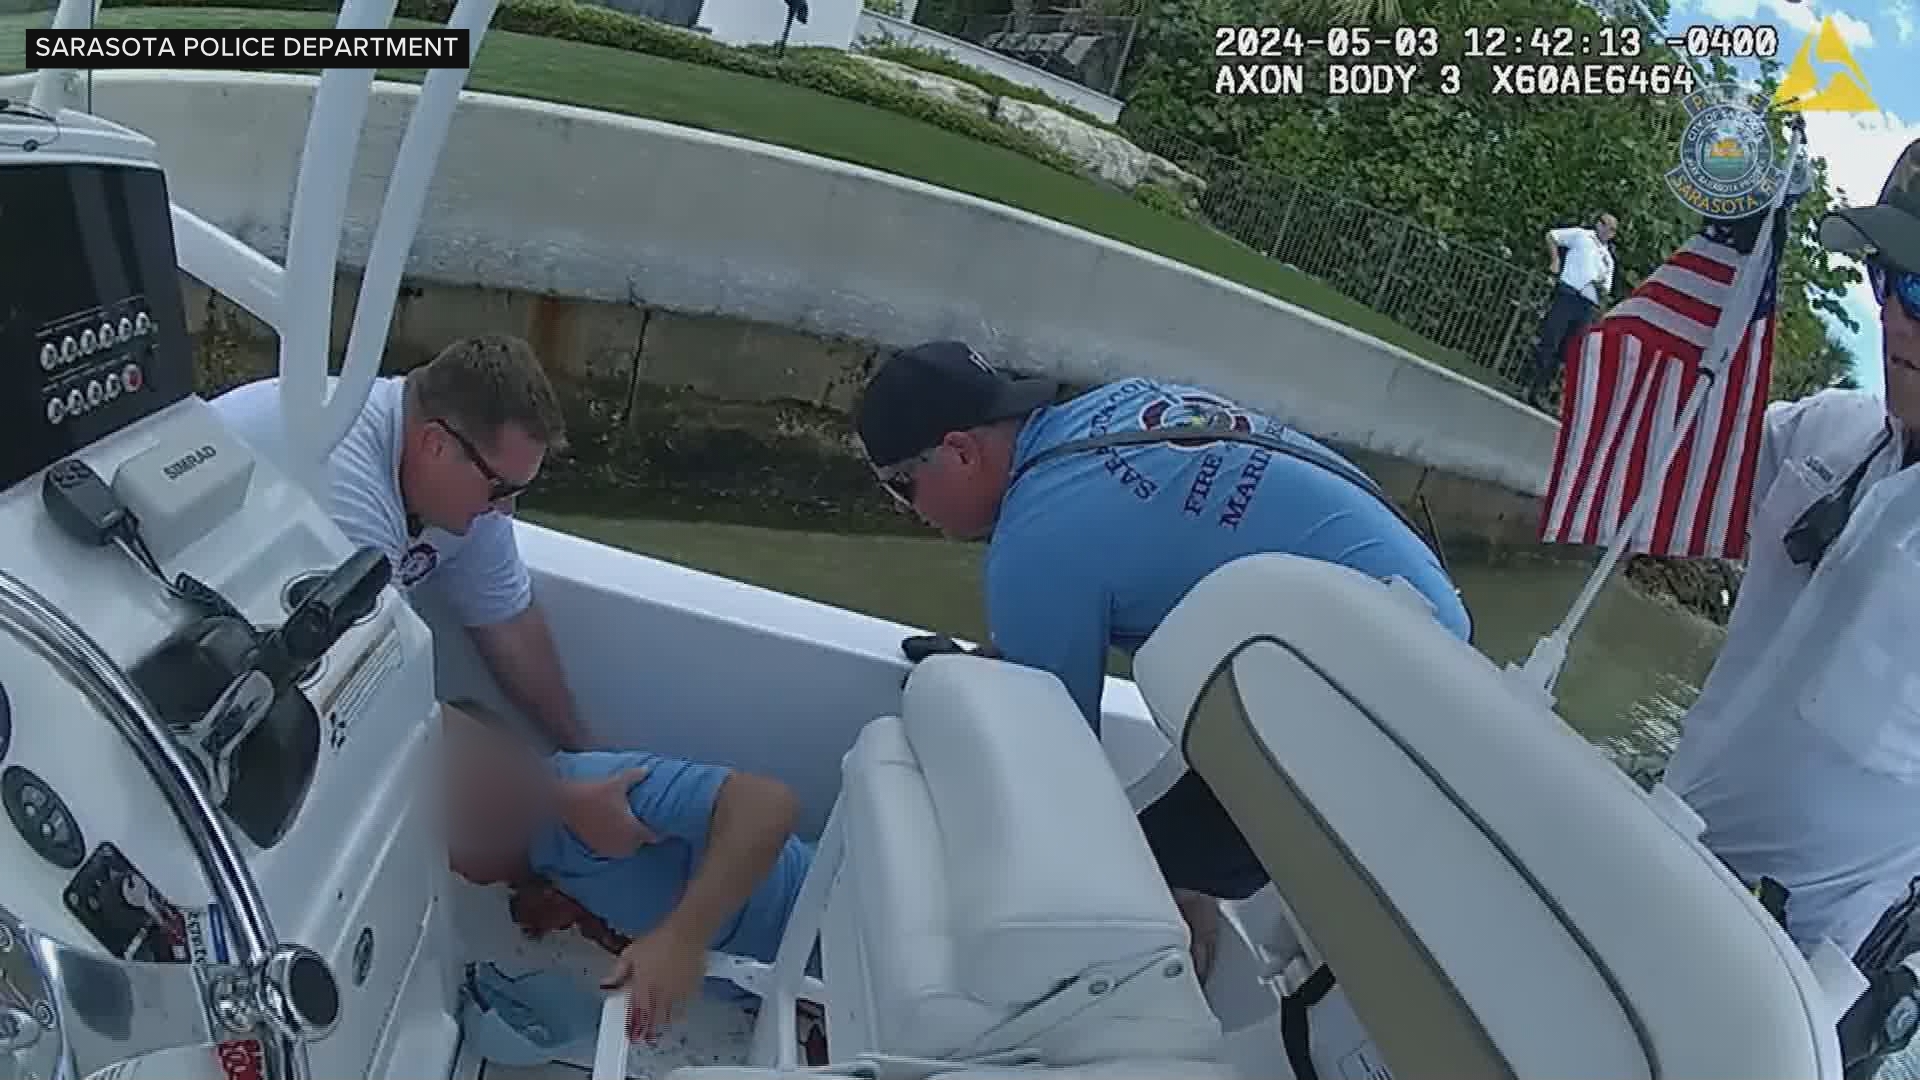 Sarasota Marine Patrol Officer Michael Skinner stopped a boat doing circles in inner coastal waters, only to find a man lying face-down in a pool of blood.